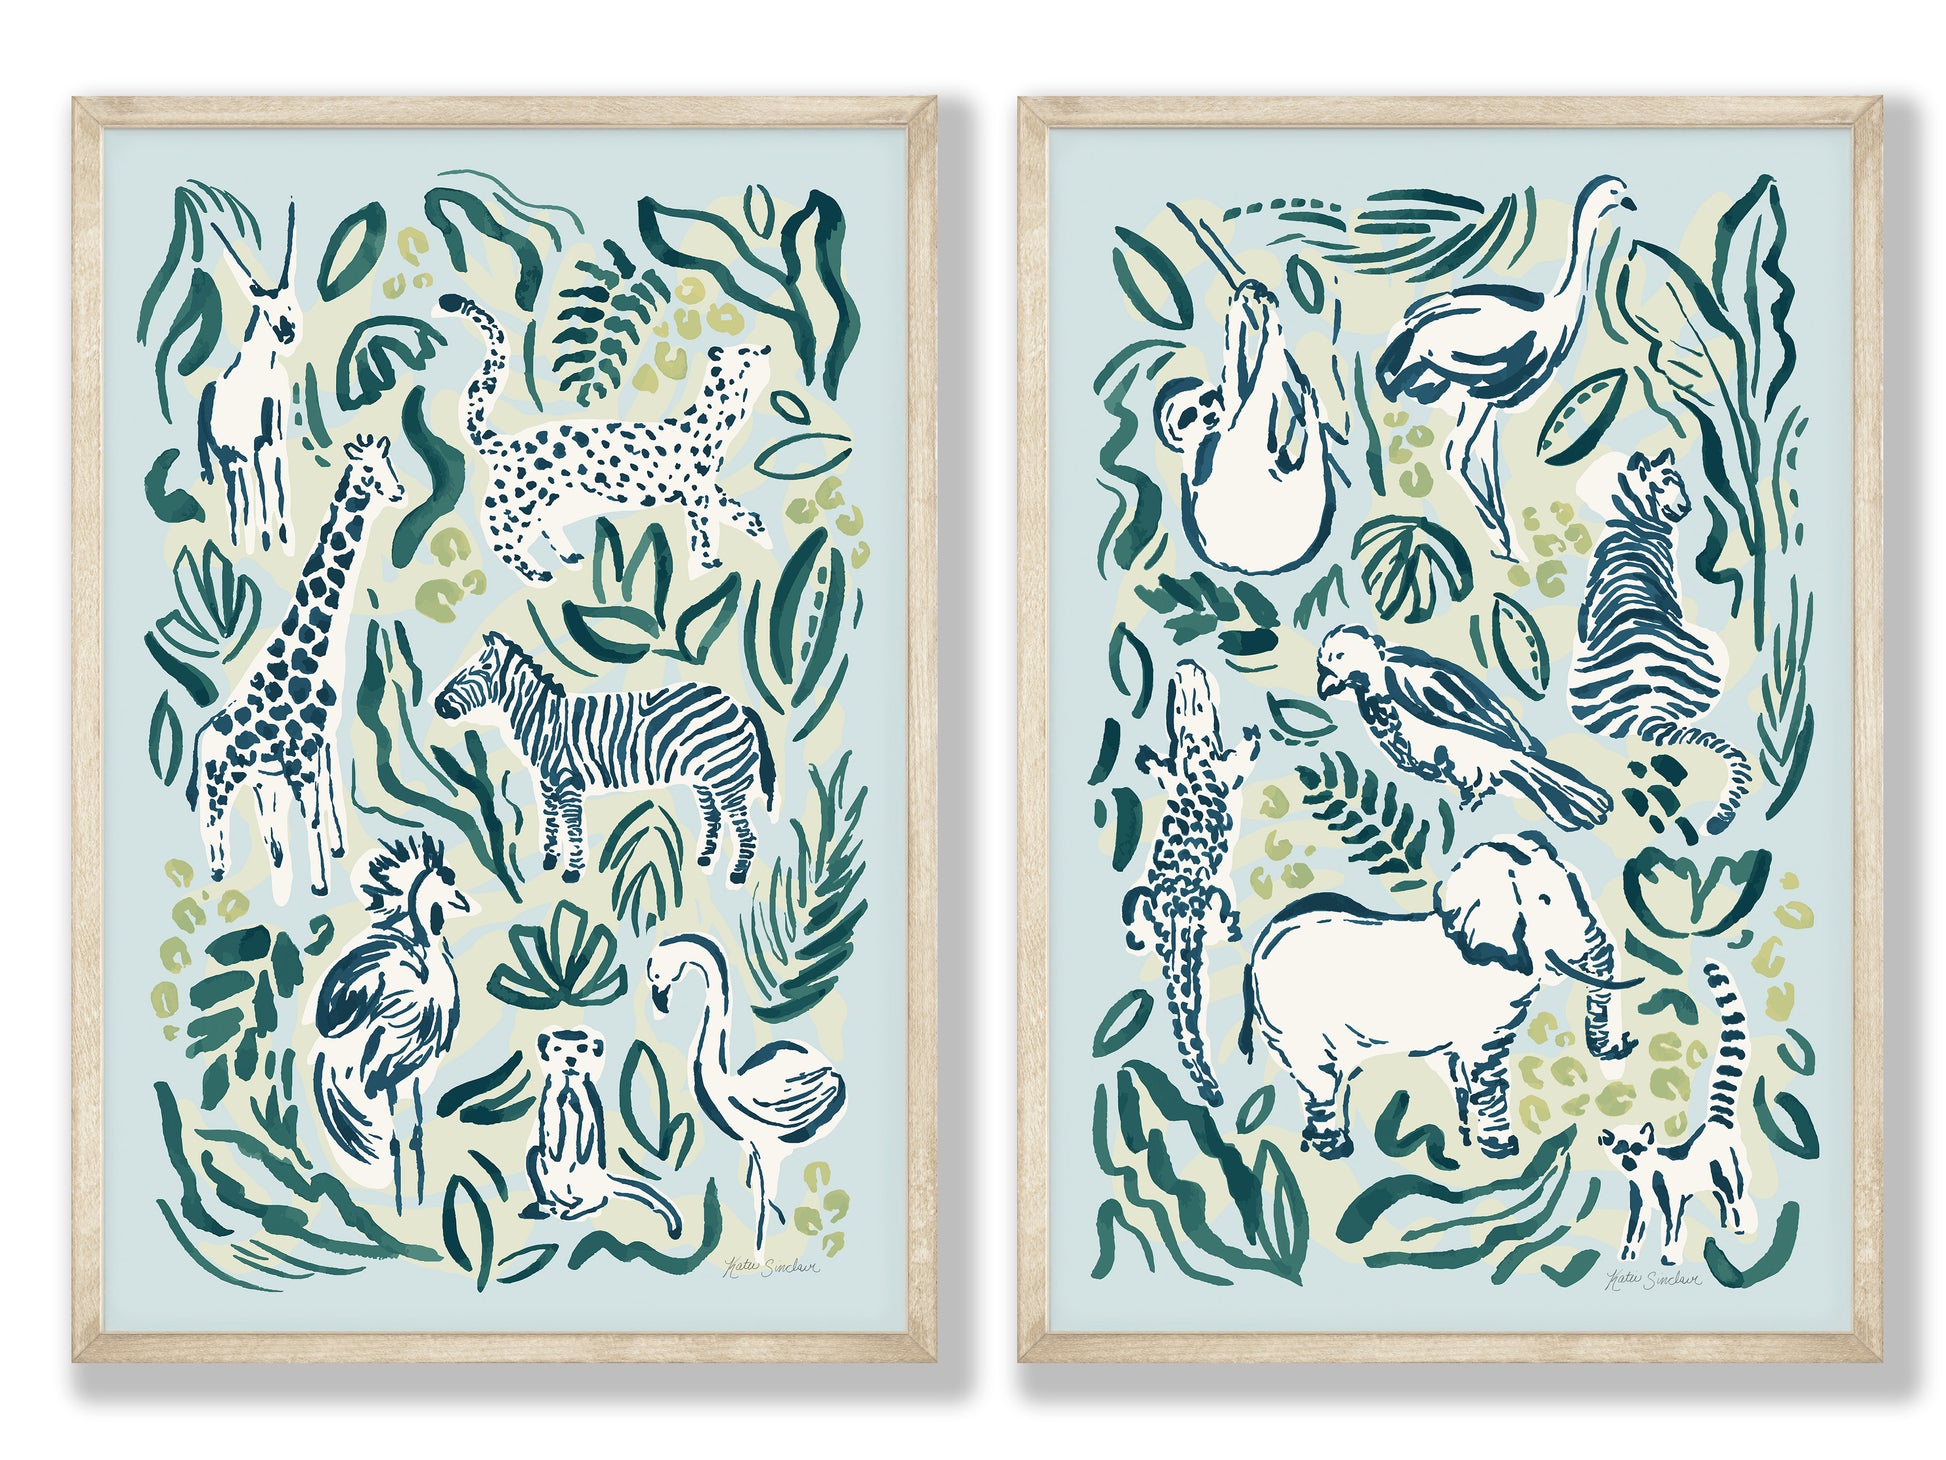 Sentosphère – Colorizzy – Forest animals